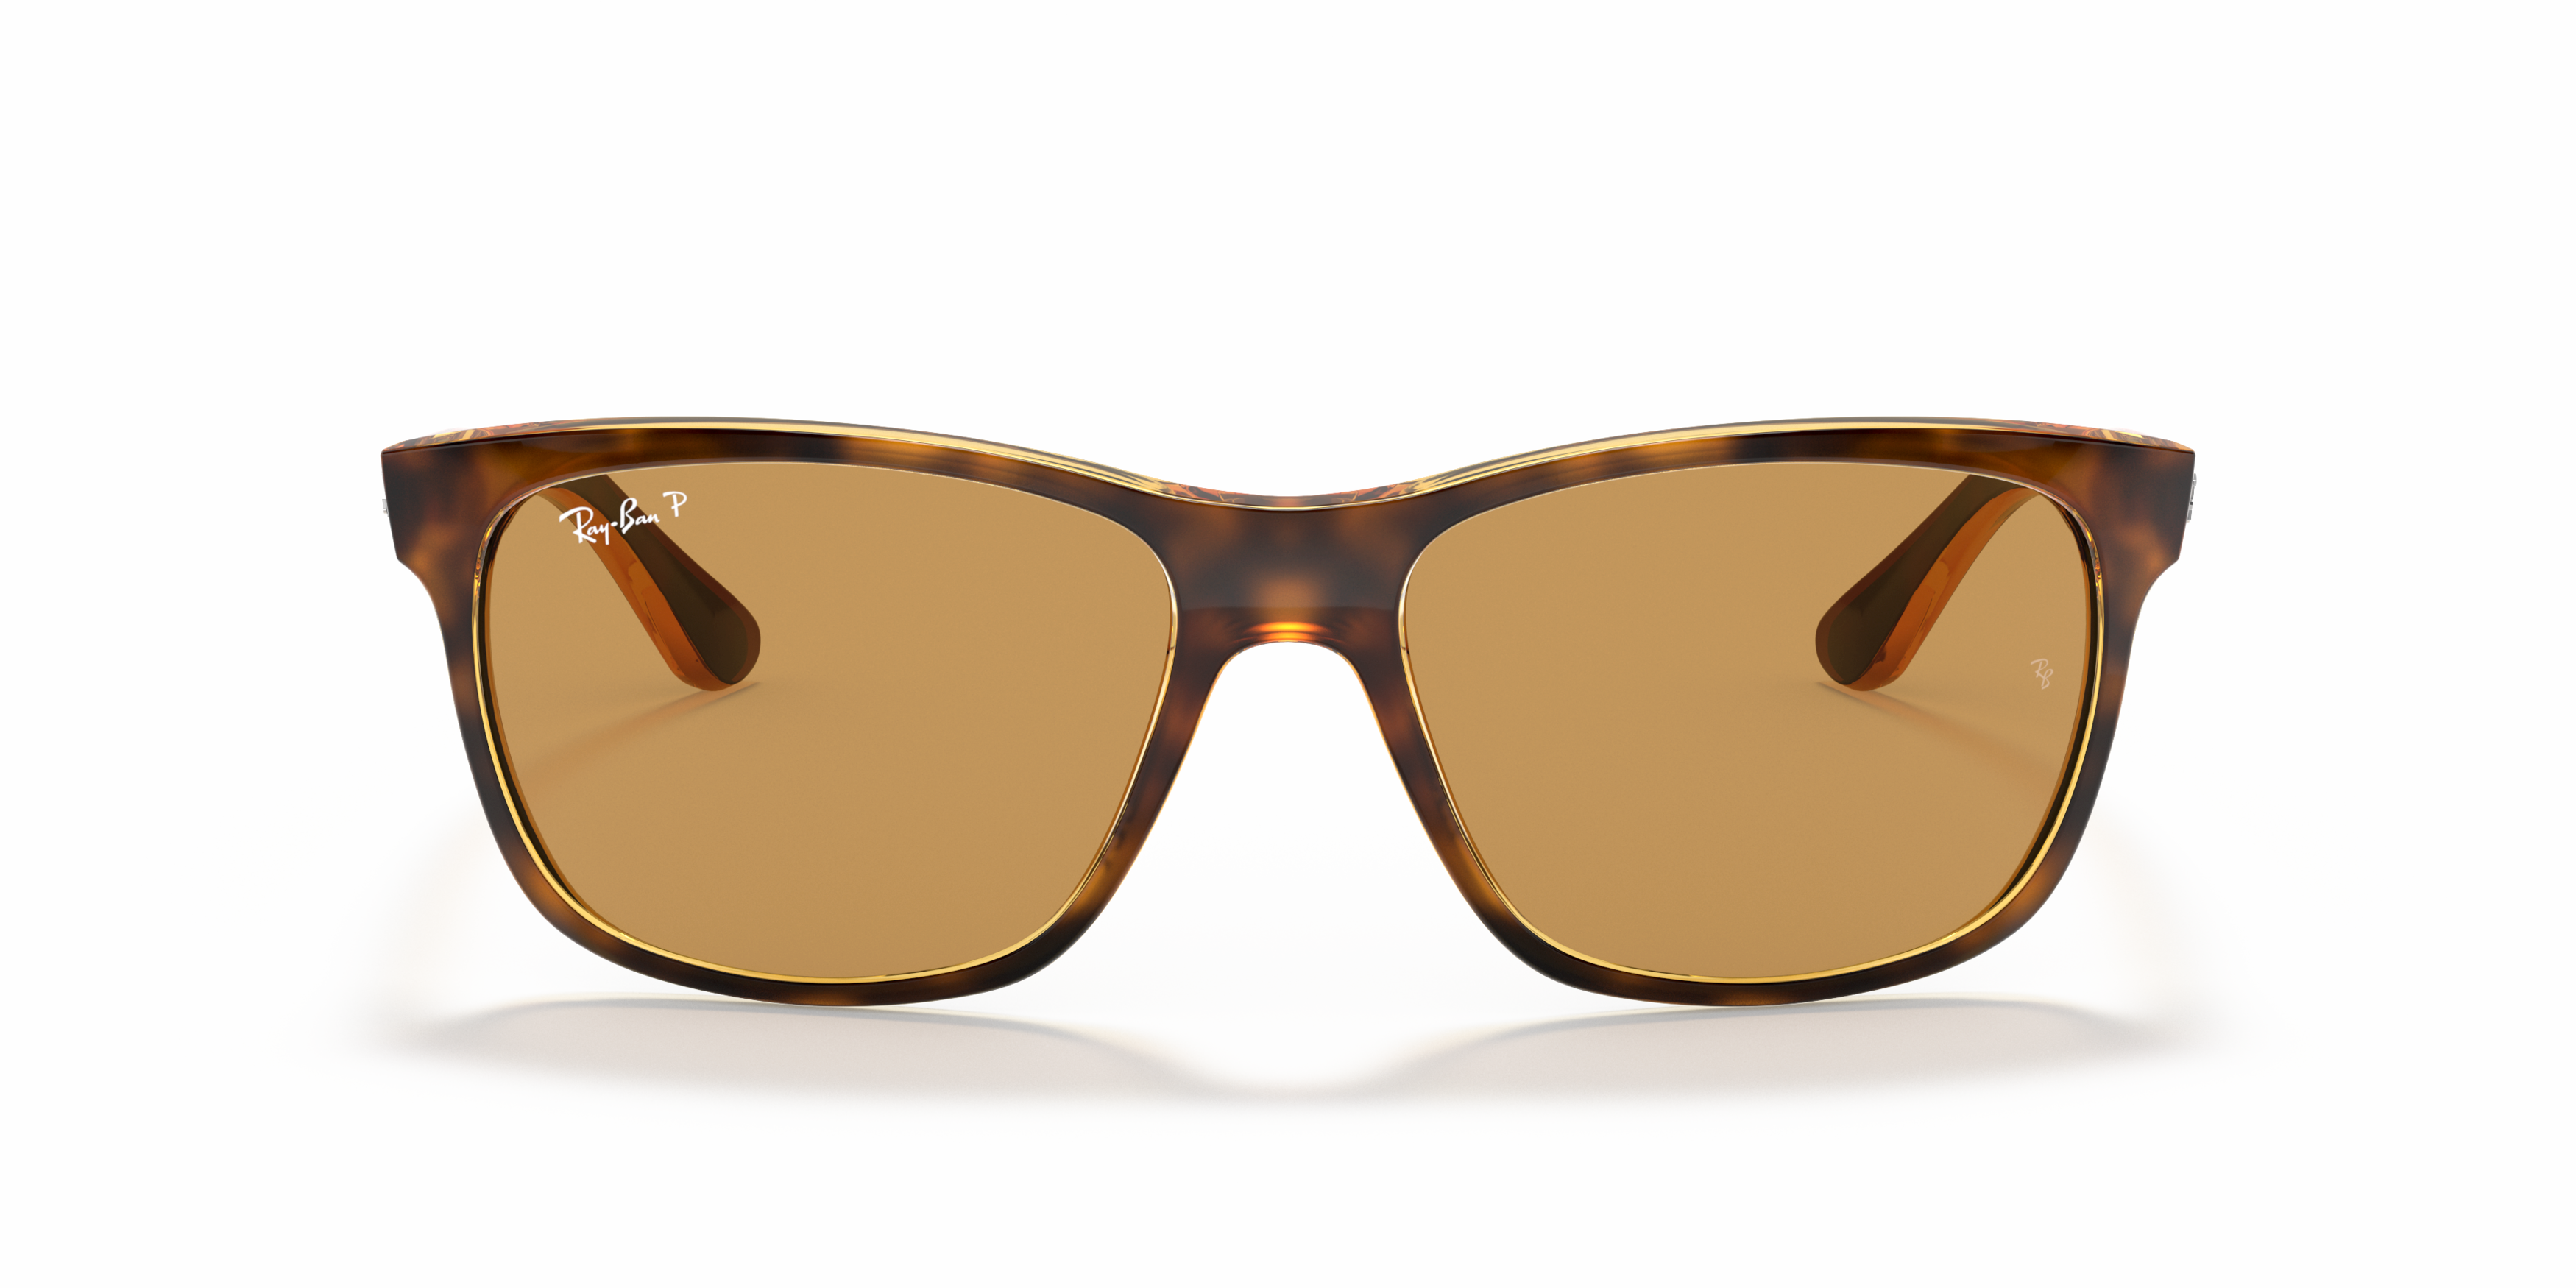 [products.image.front] RAY-BAN RB4181 710/83